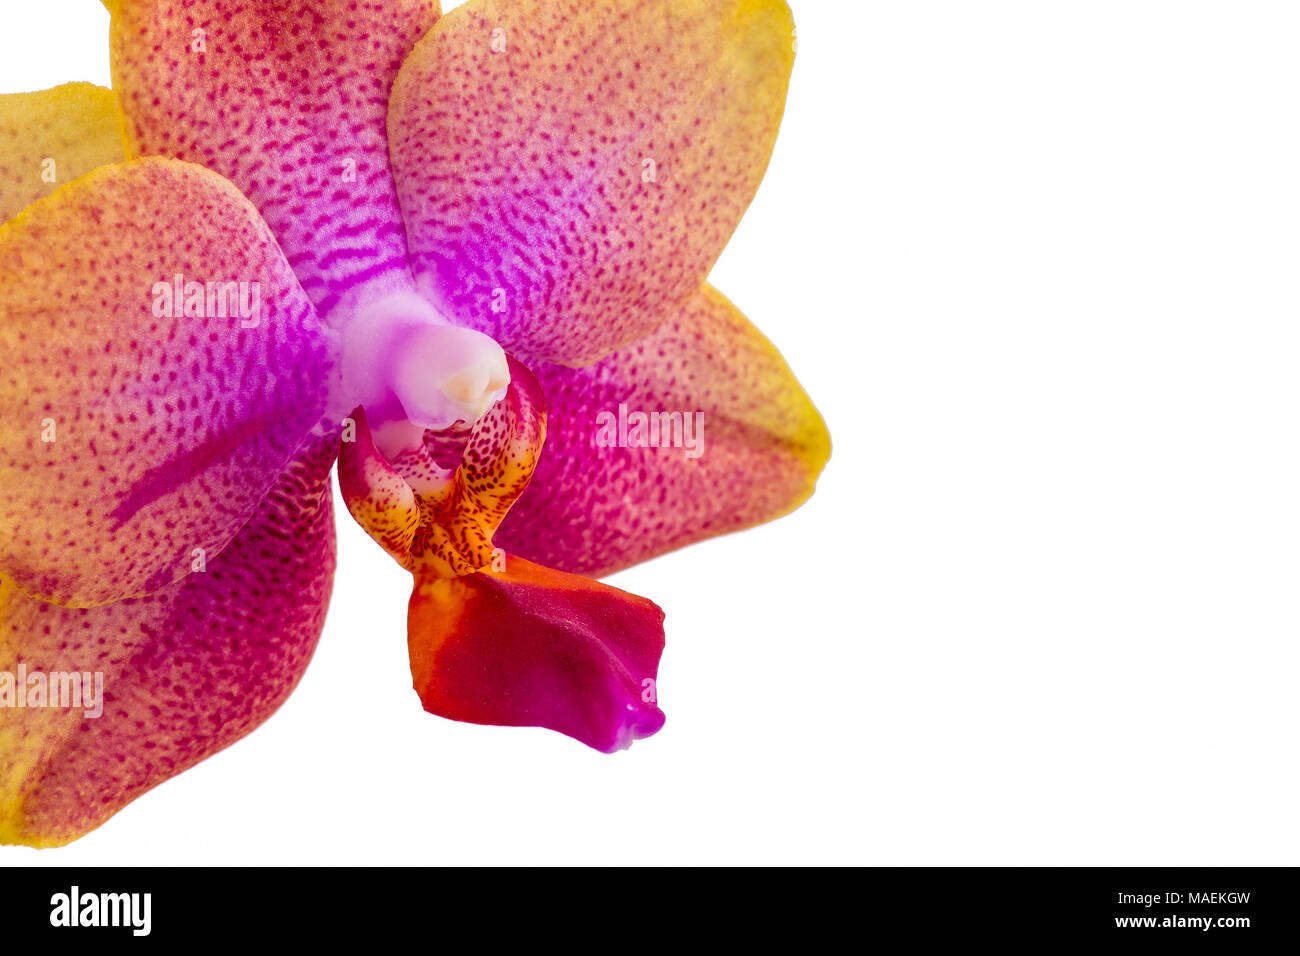 Close up of single pink and purple Phalaenopsis Orchid blossom isolated on white background, copy space on right Stock Photo